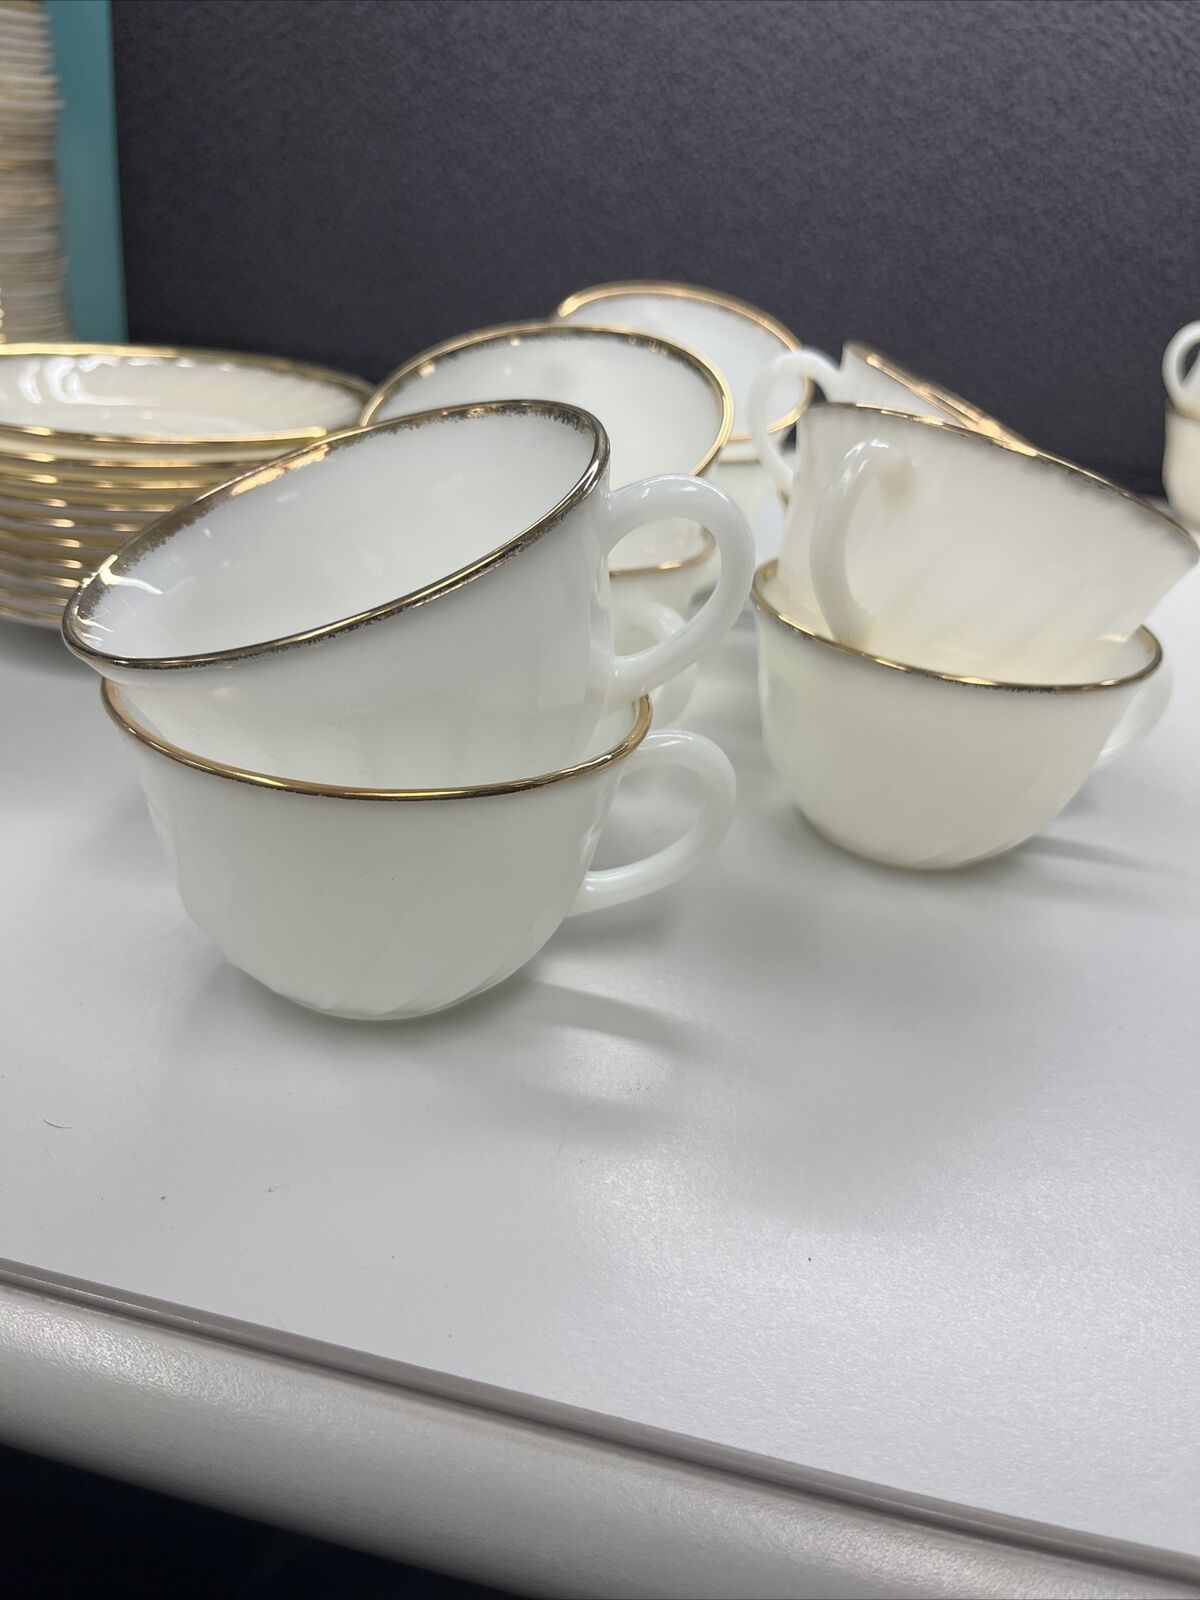 Fire King Teacups with 6” Saucers Swirl Milk Glass Gold Trim Anchor Hocking 10pc